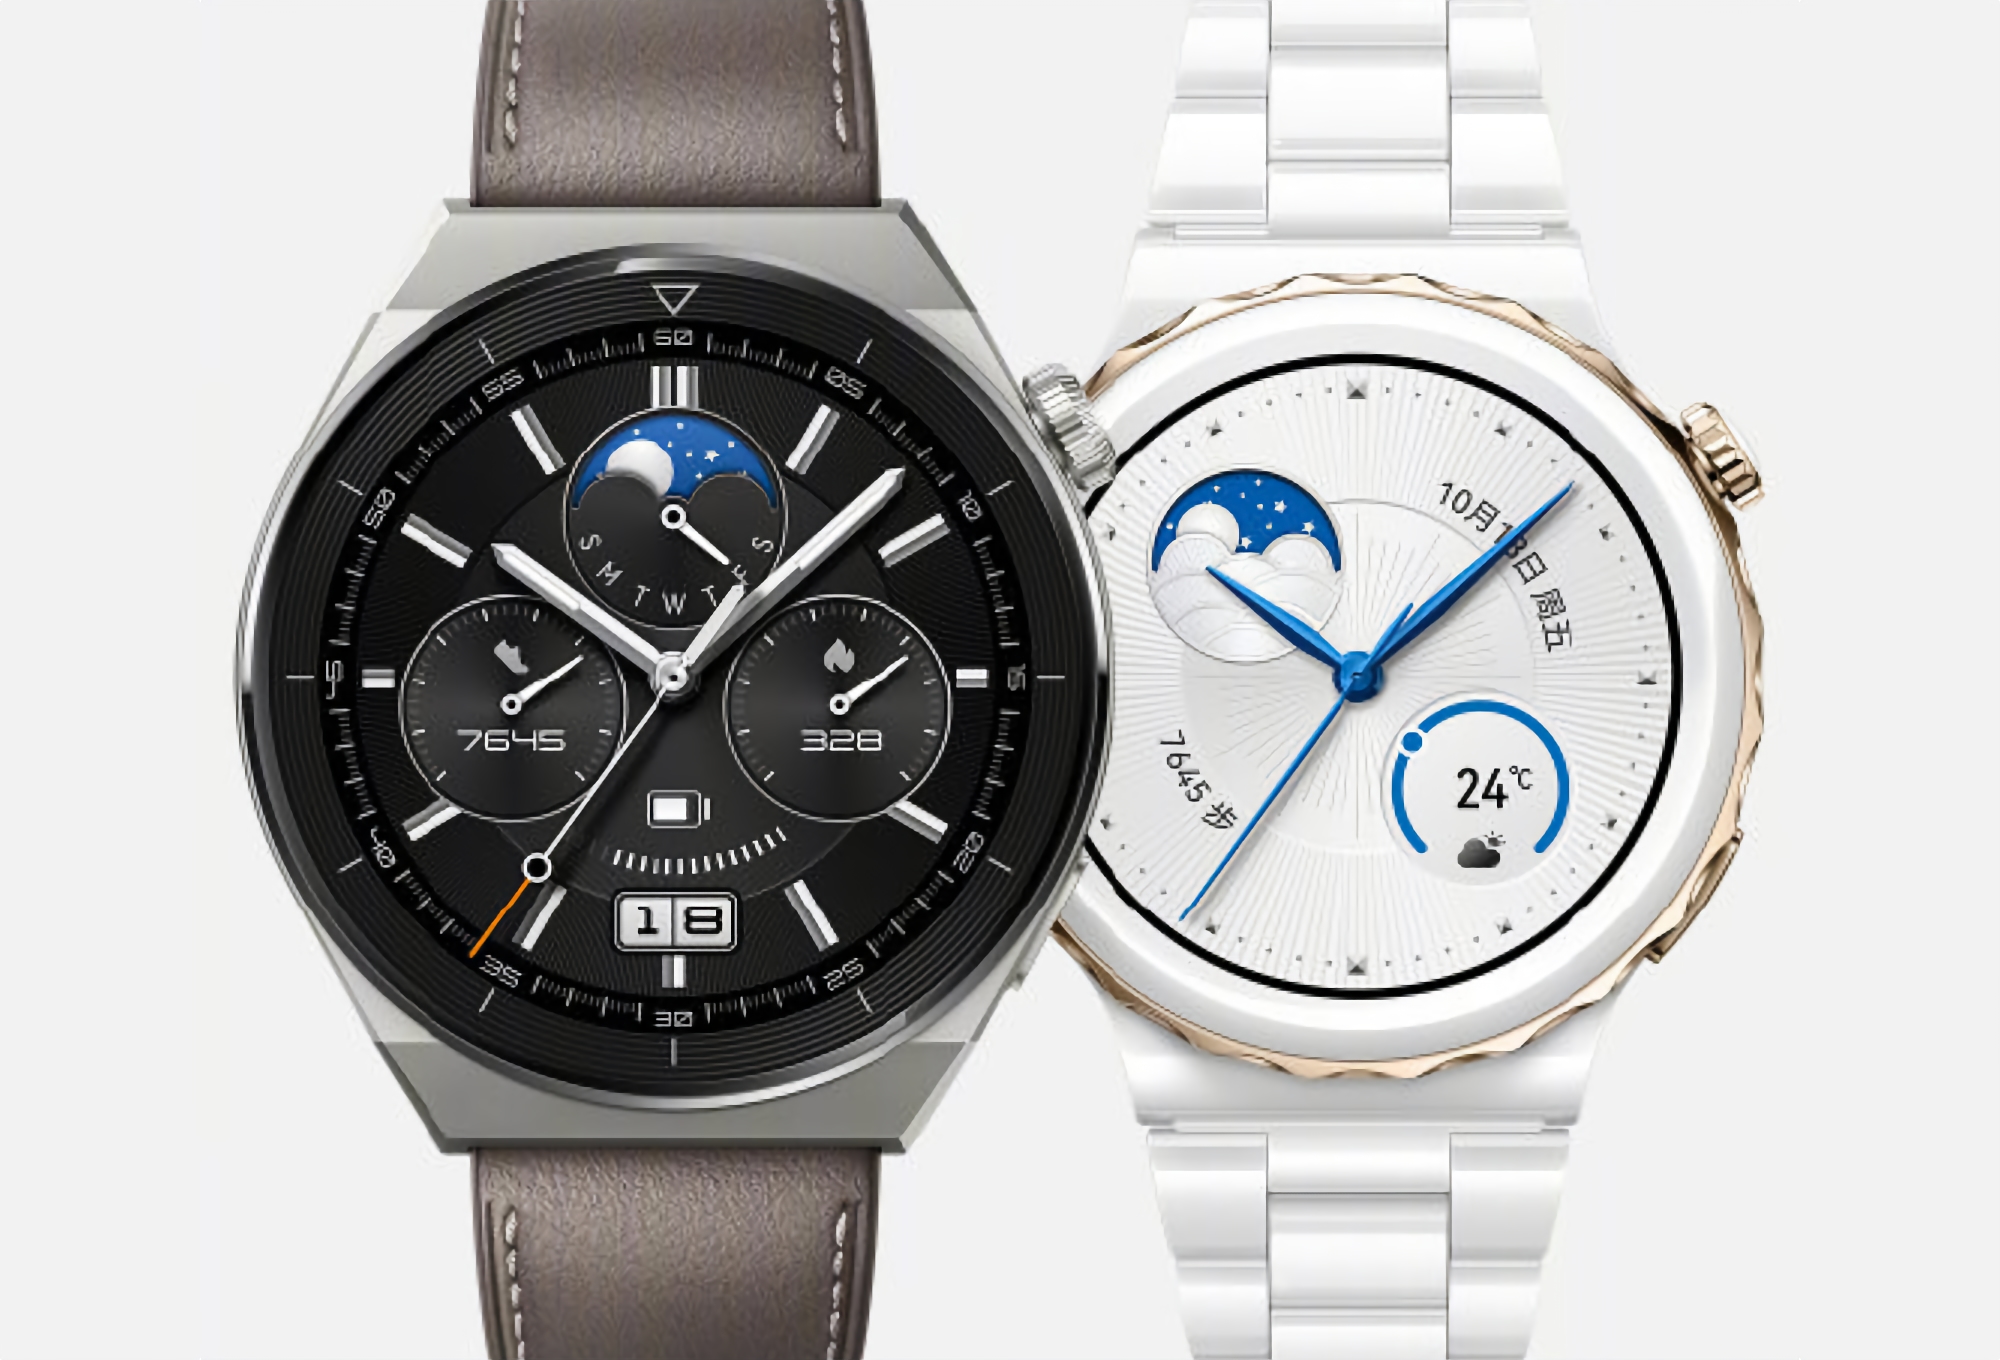 Huawei Watch GT 3 Pro: smart watch with ECG, NFC, diving mode and autonomy up to 14 days for $380